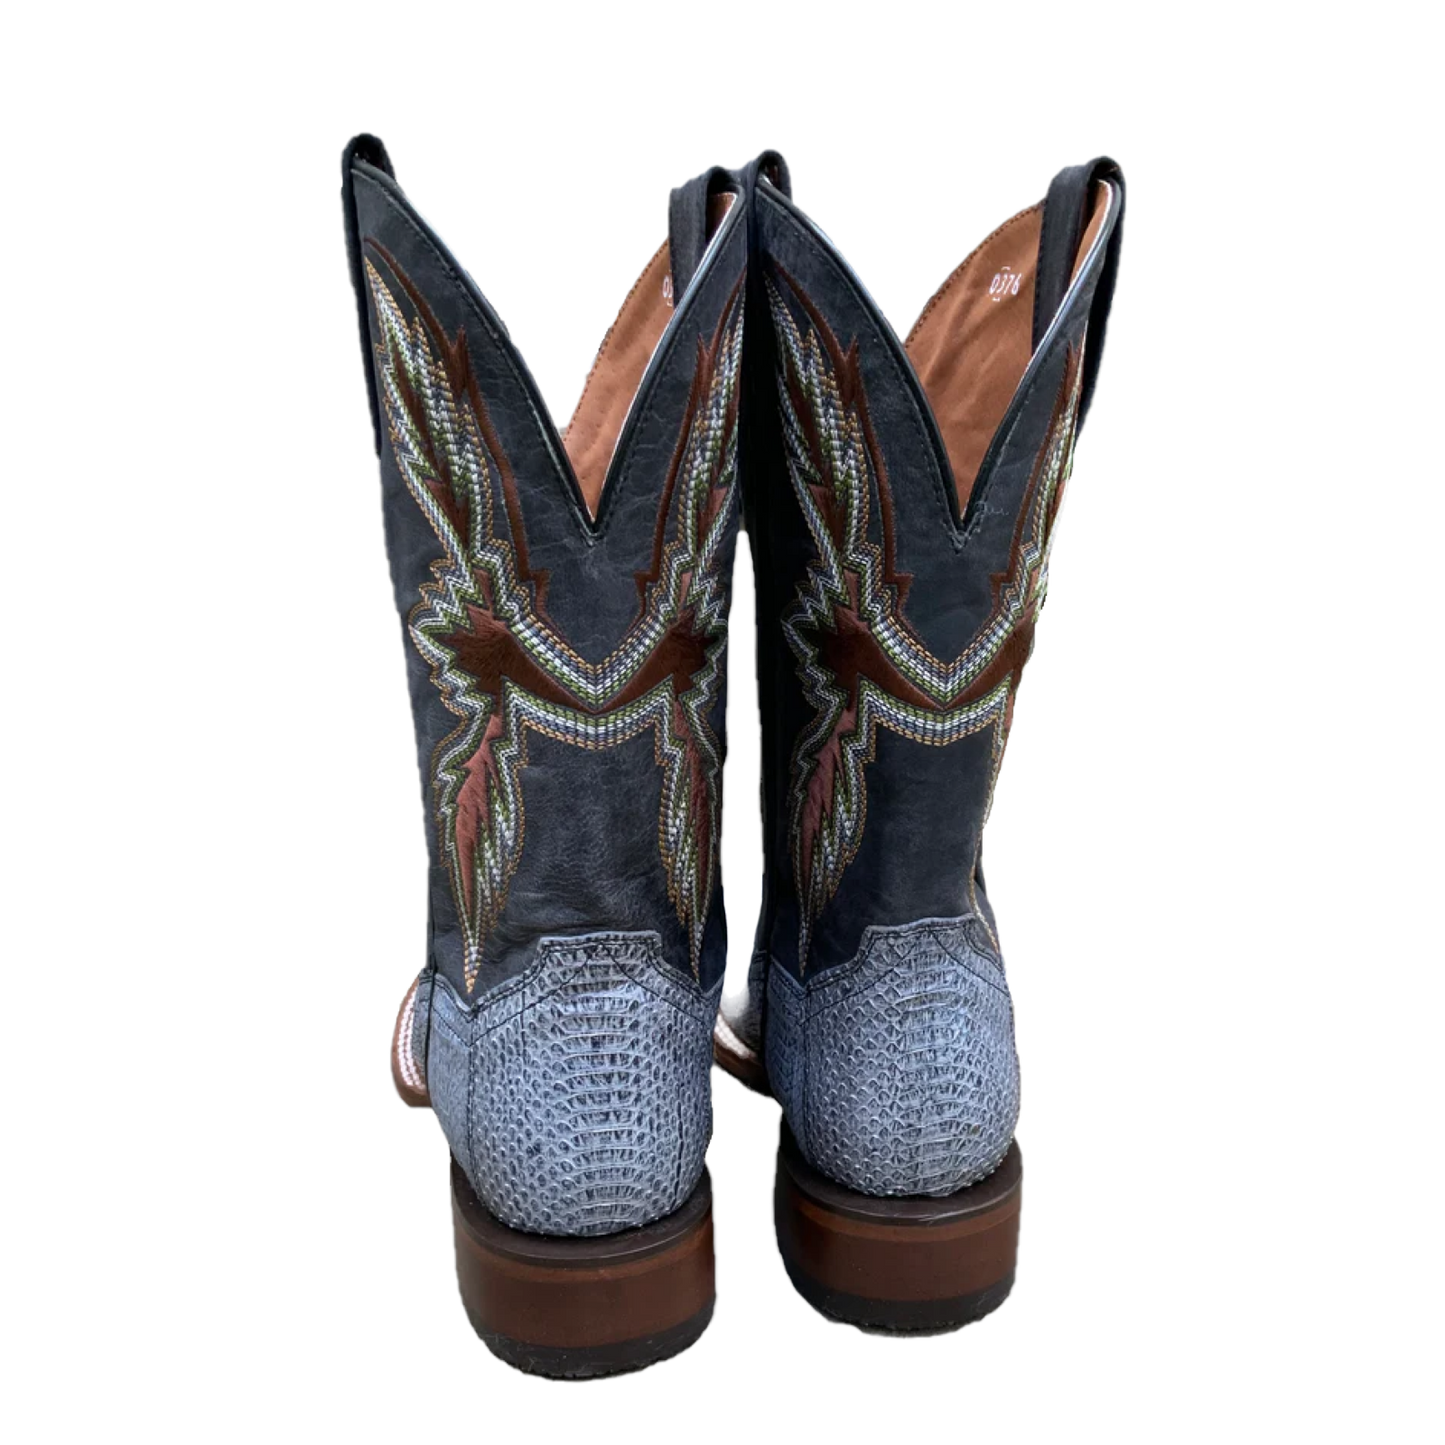 Load image into Gallery viewer, Dan Post® Men&amp;#39;s Exotic Slyther Denim Watersnake Square Toe Boots DP4100
